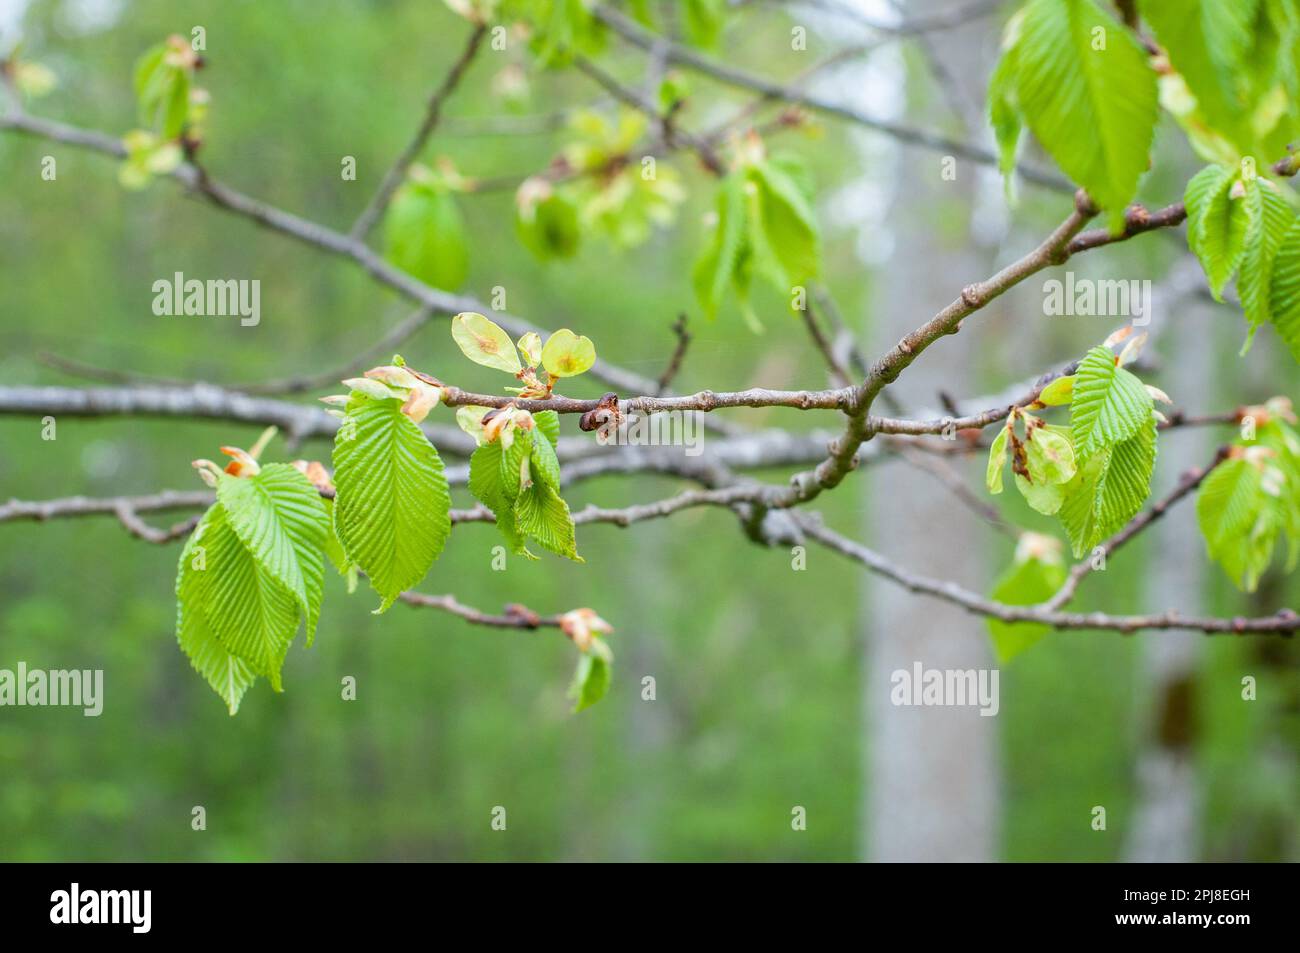 A branch of an Elm (Ulmus glabra) tree with seeds and young leaves in spring, Stock Photo